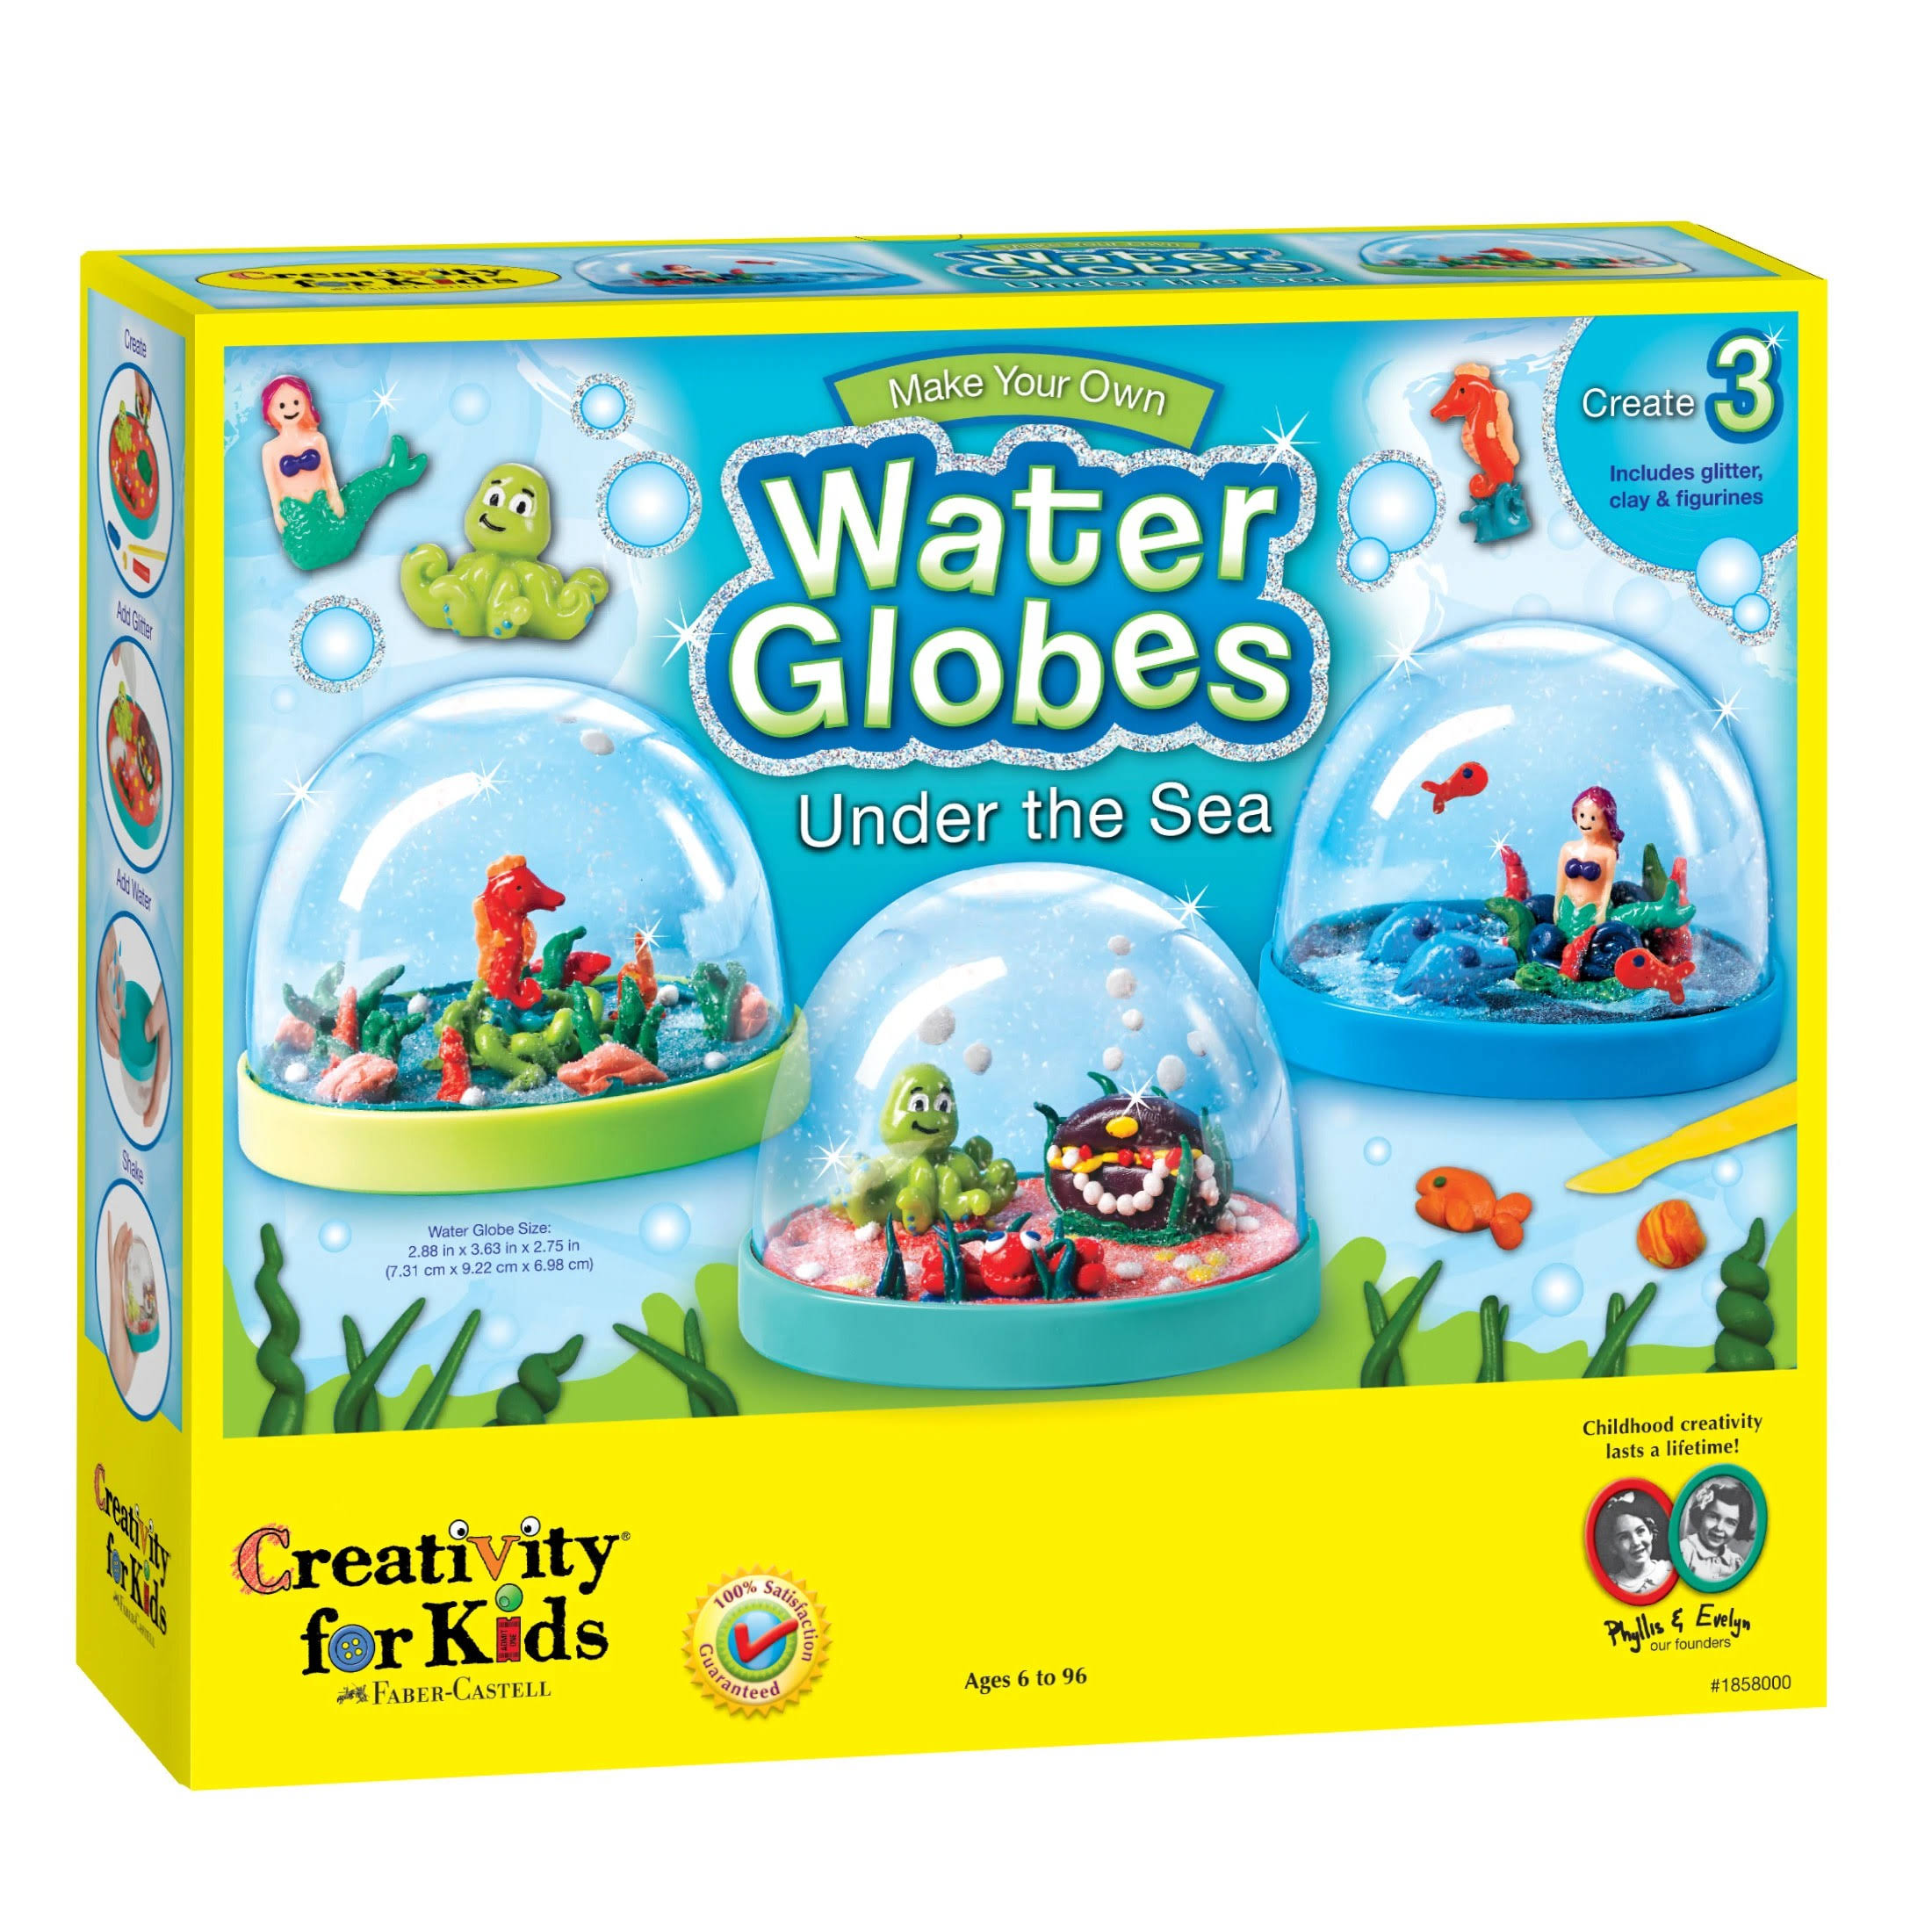 Faber-castell Creativity for Kids Make Your Own Water Globes - Under The Sea